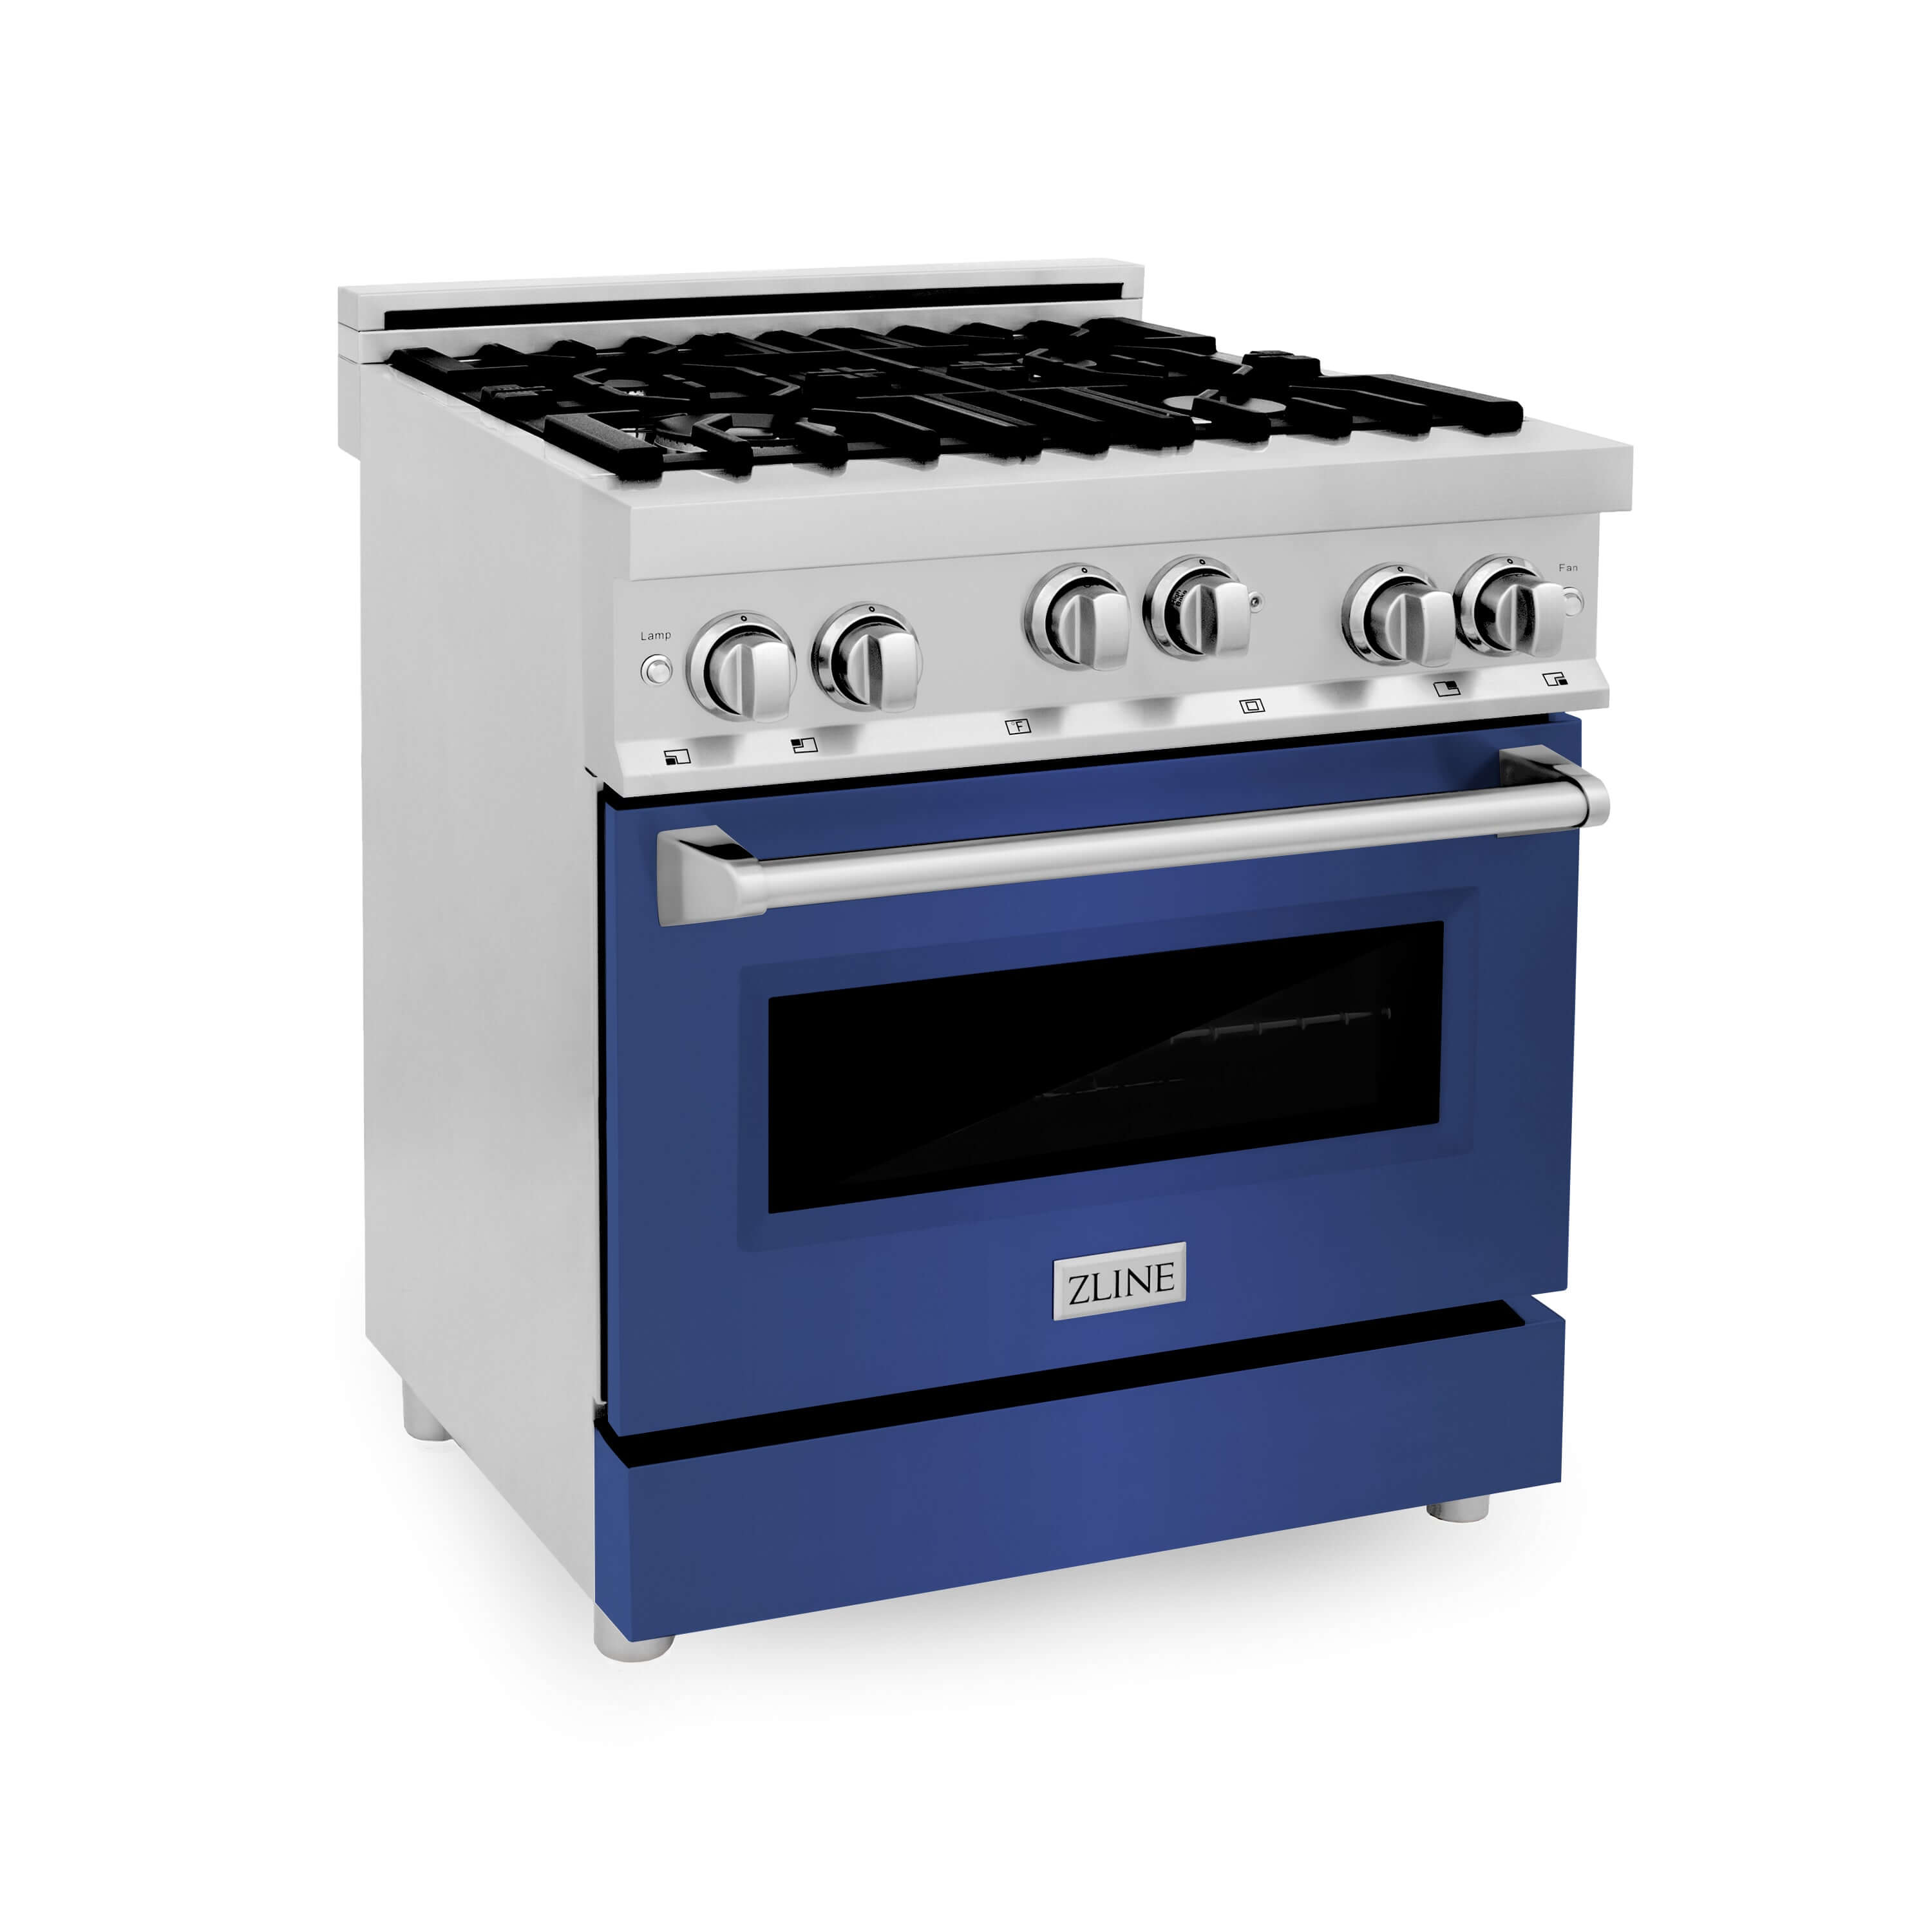 ZLINE 30 in. 4.0 cu. ft. Range with Gas Stove and Gas Oven in Stainless Steel with Color Door Options (RG30)